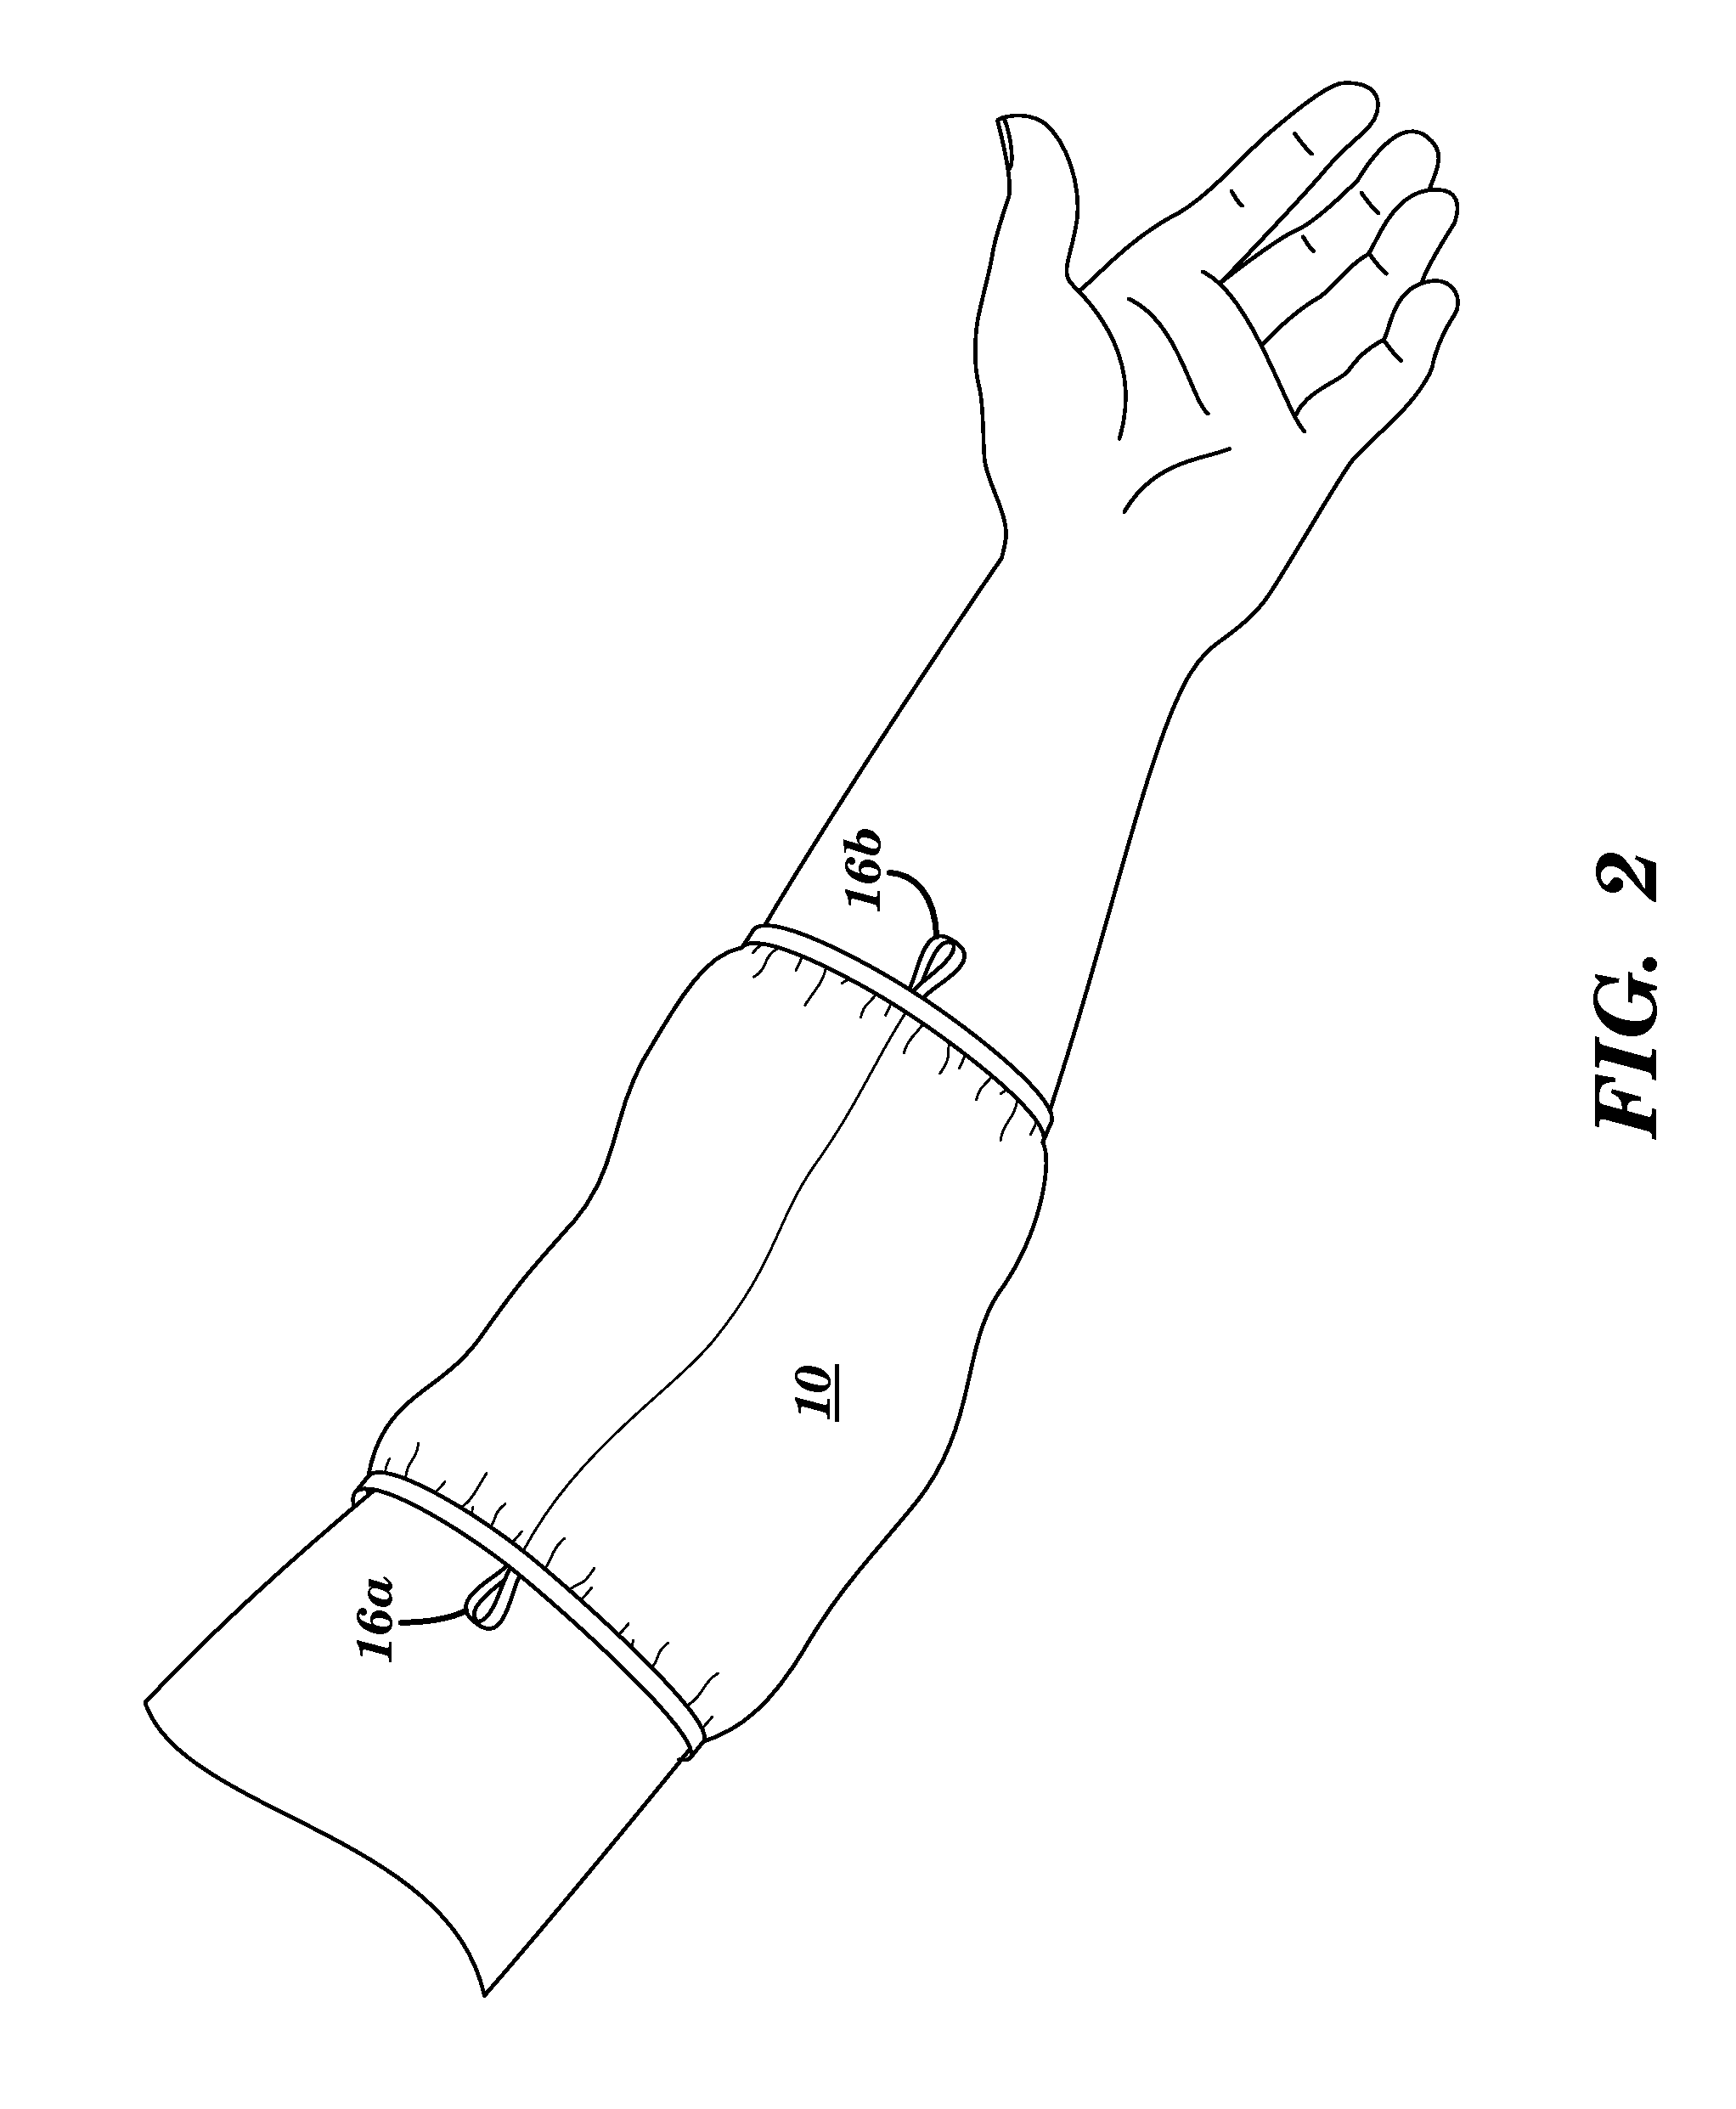 Disposable elbow sleeve for sneezing and coughing